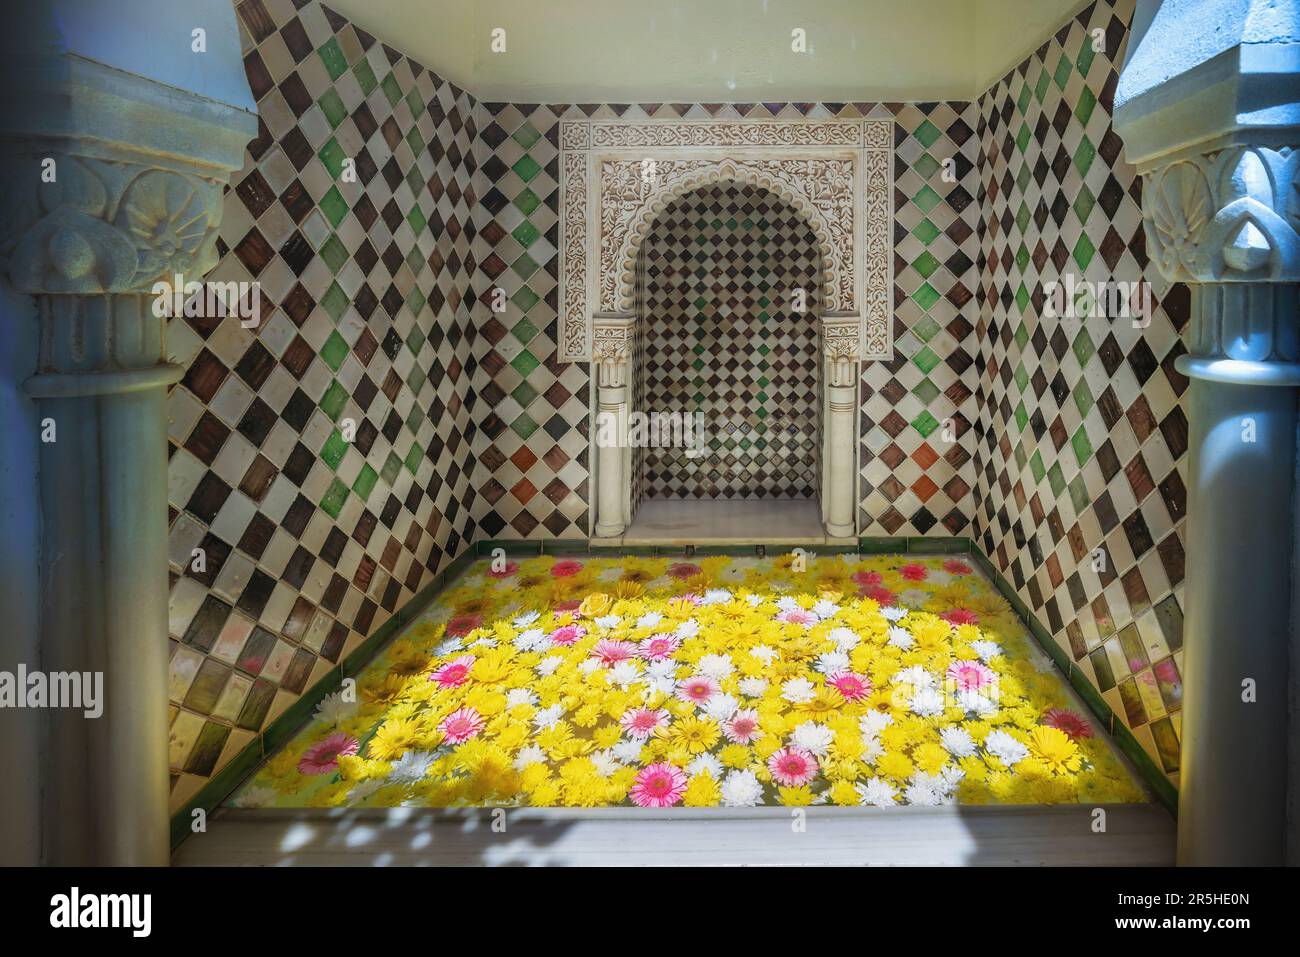 Carved Fountain with flowers at Casa Andalusi (House of Andalusia) - Cordoba, Andalusia, Spain Stock Photo